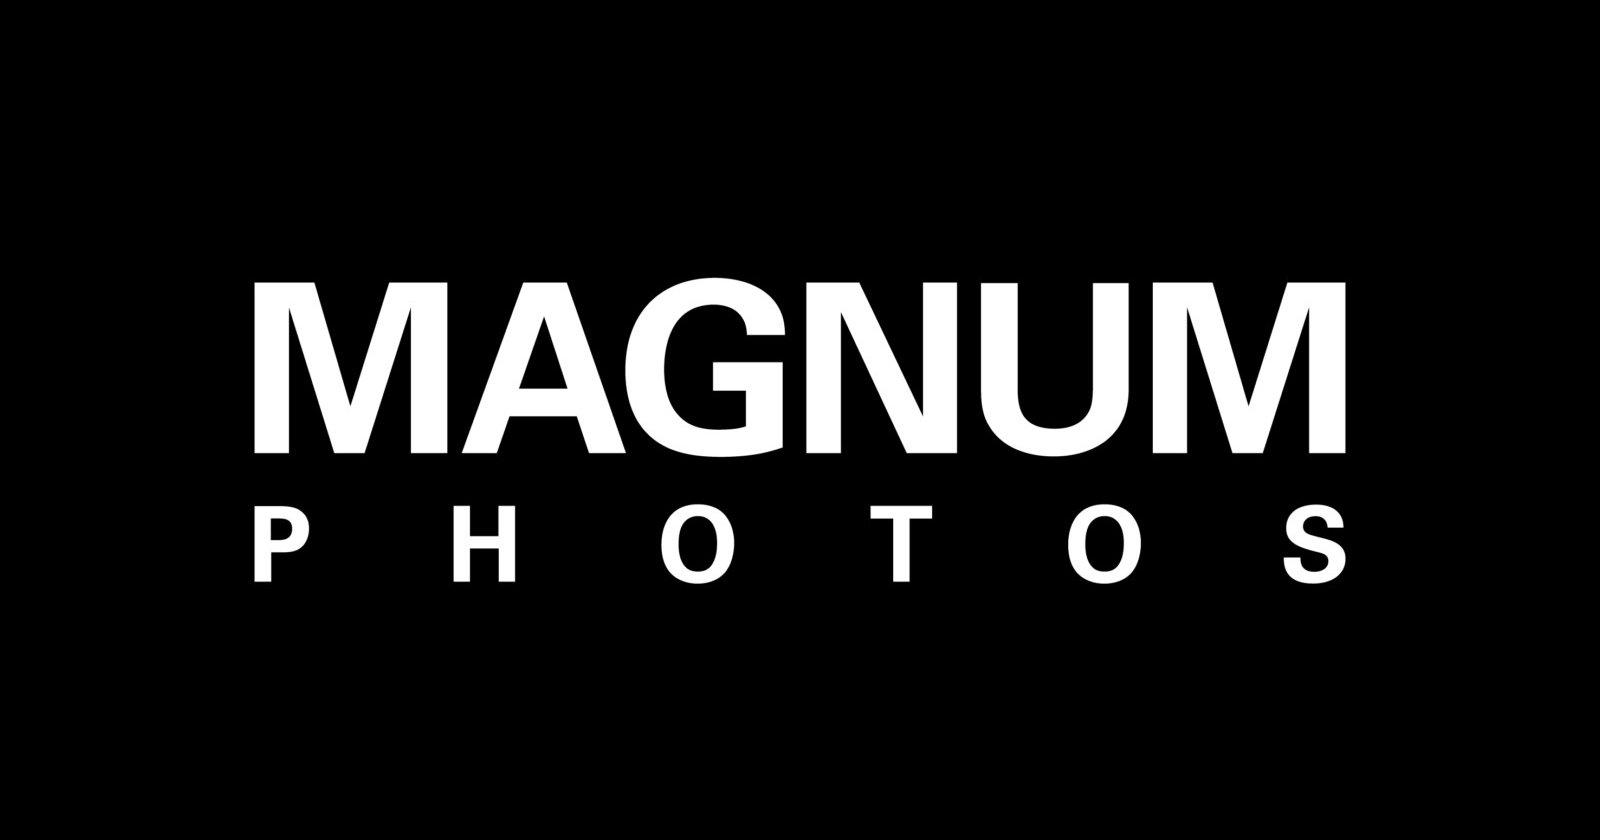 Magnum Photos Has Finally Published Its Code of Conduct